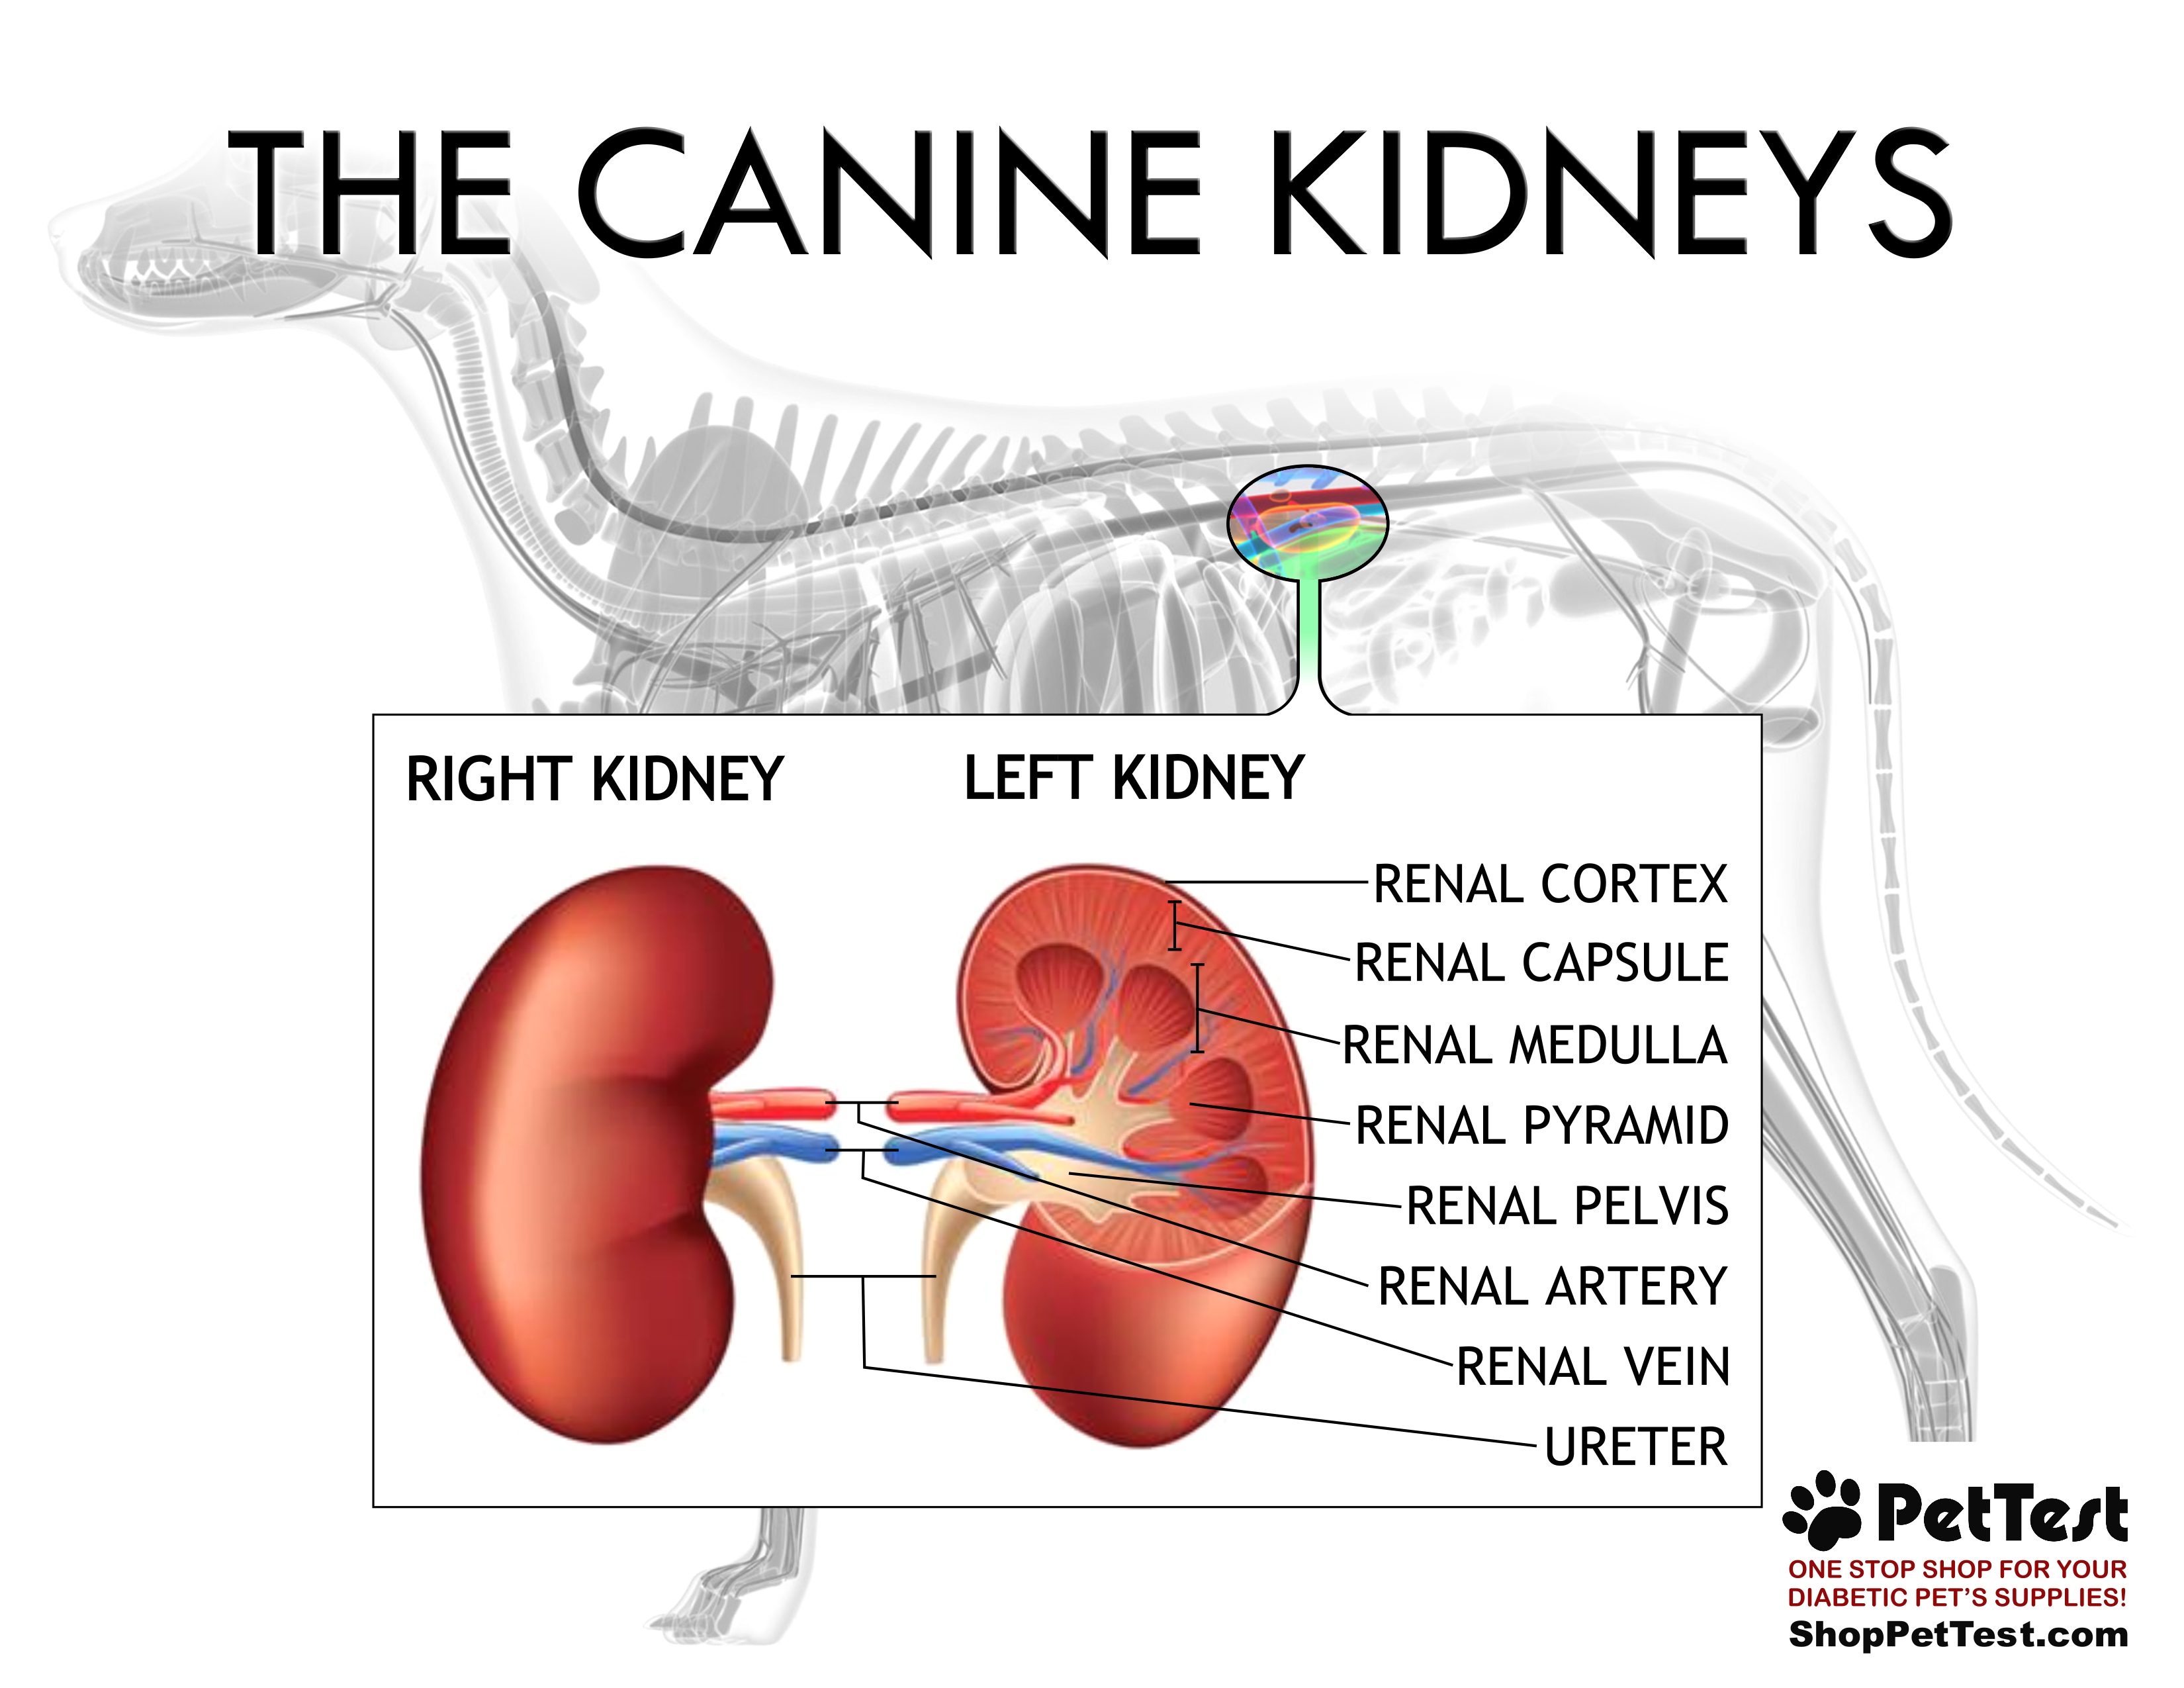 Functions of the Canine Kidneys for PetTest mtm